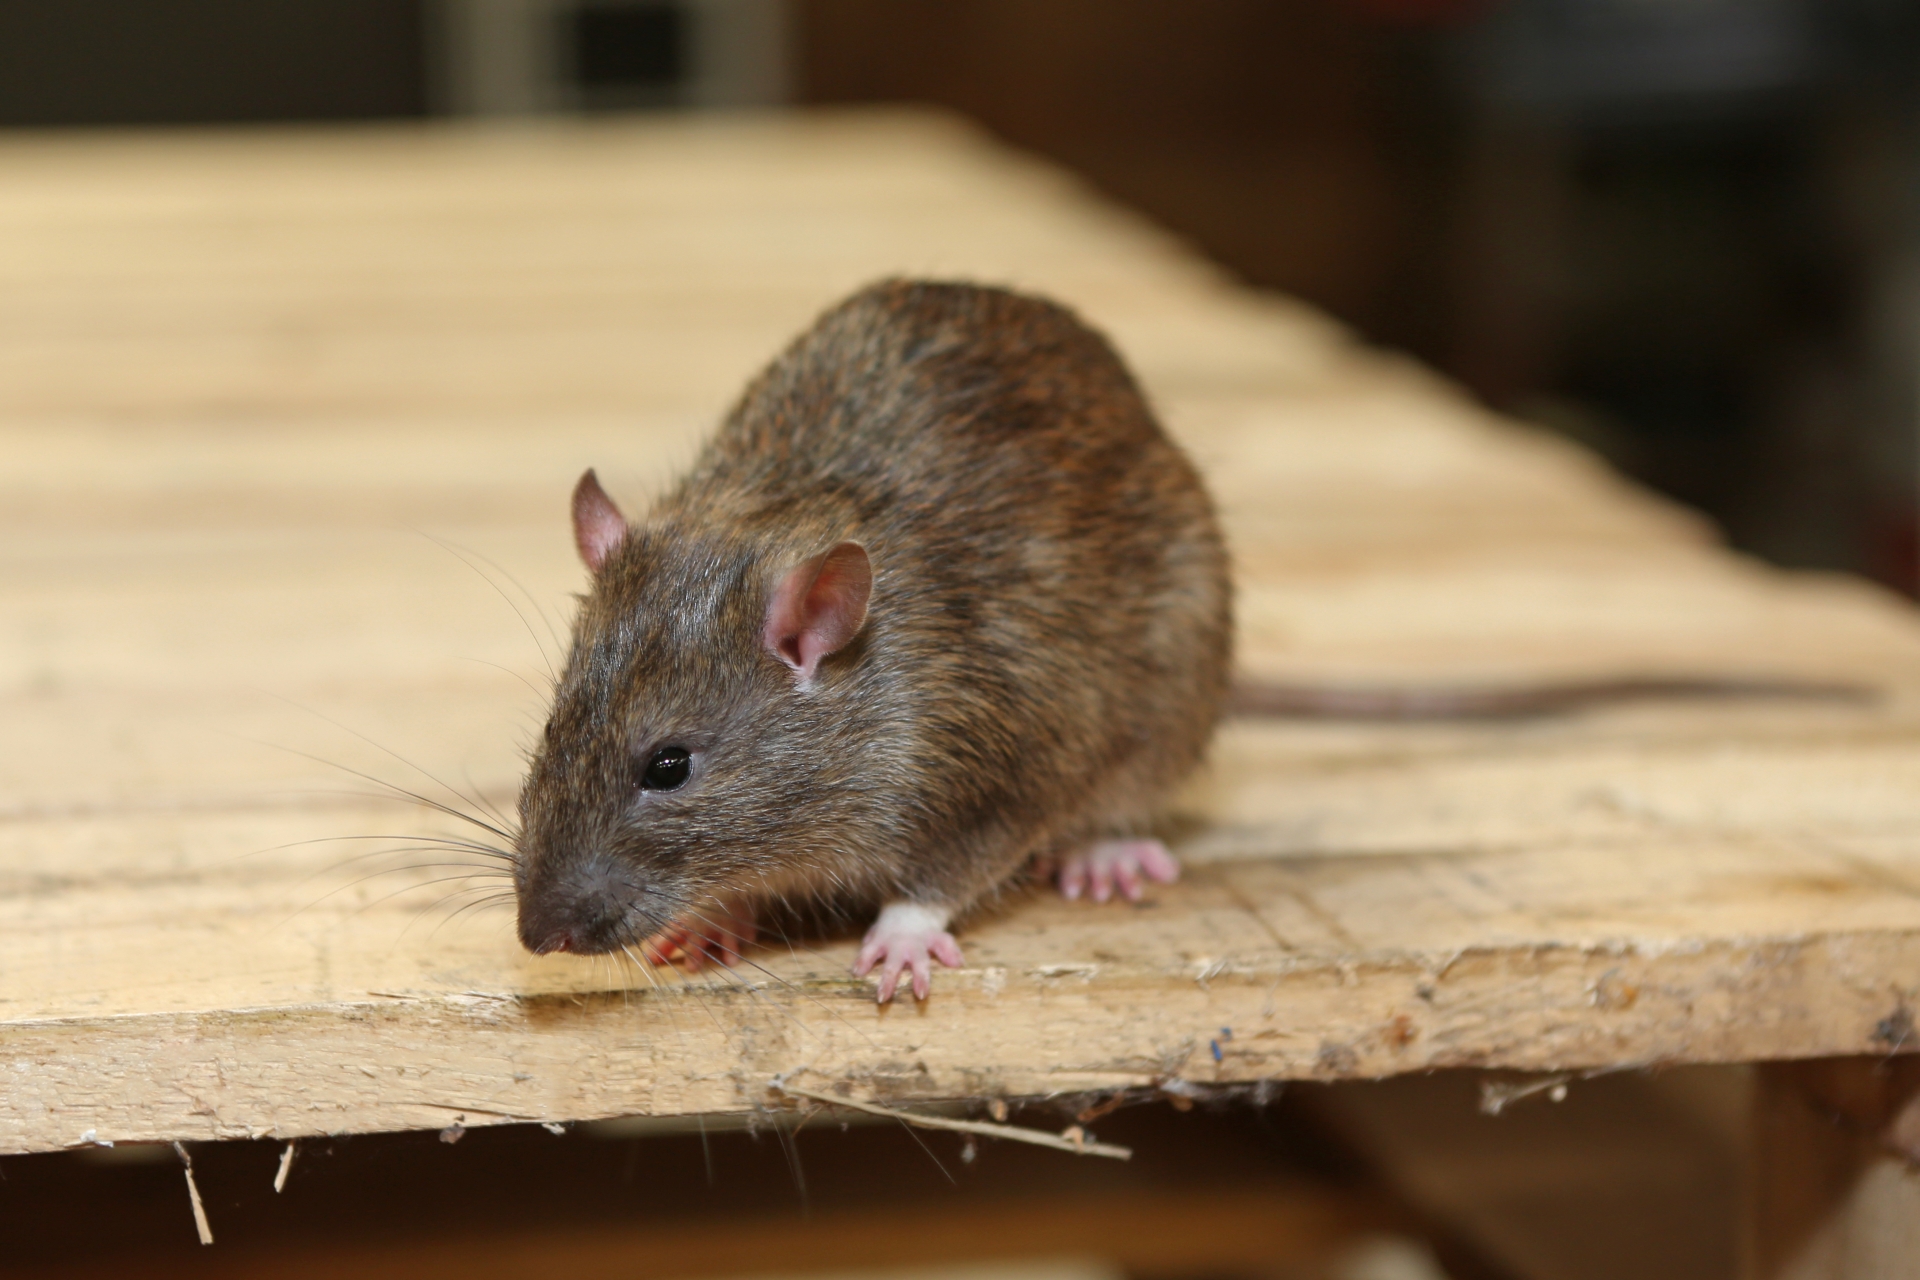 Rat Control, Pest Control in Falconwood, Welling, DA16. Call Now 020 8166 9746